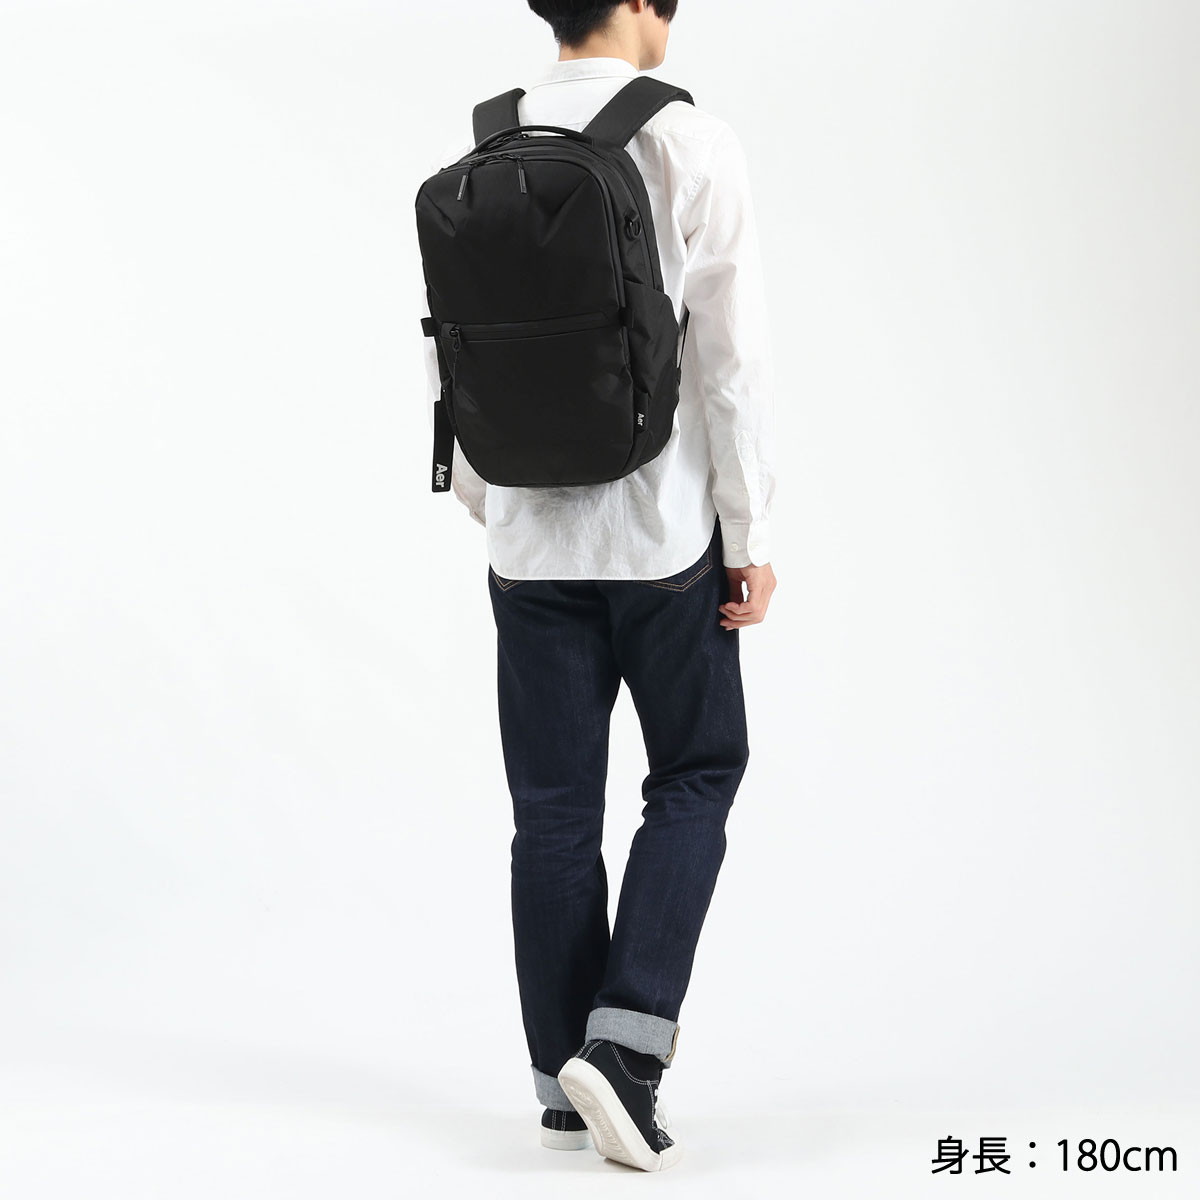 Aer エアー City Collection City Pack X-pac バックパック 14L